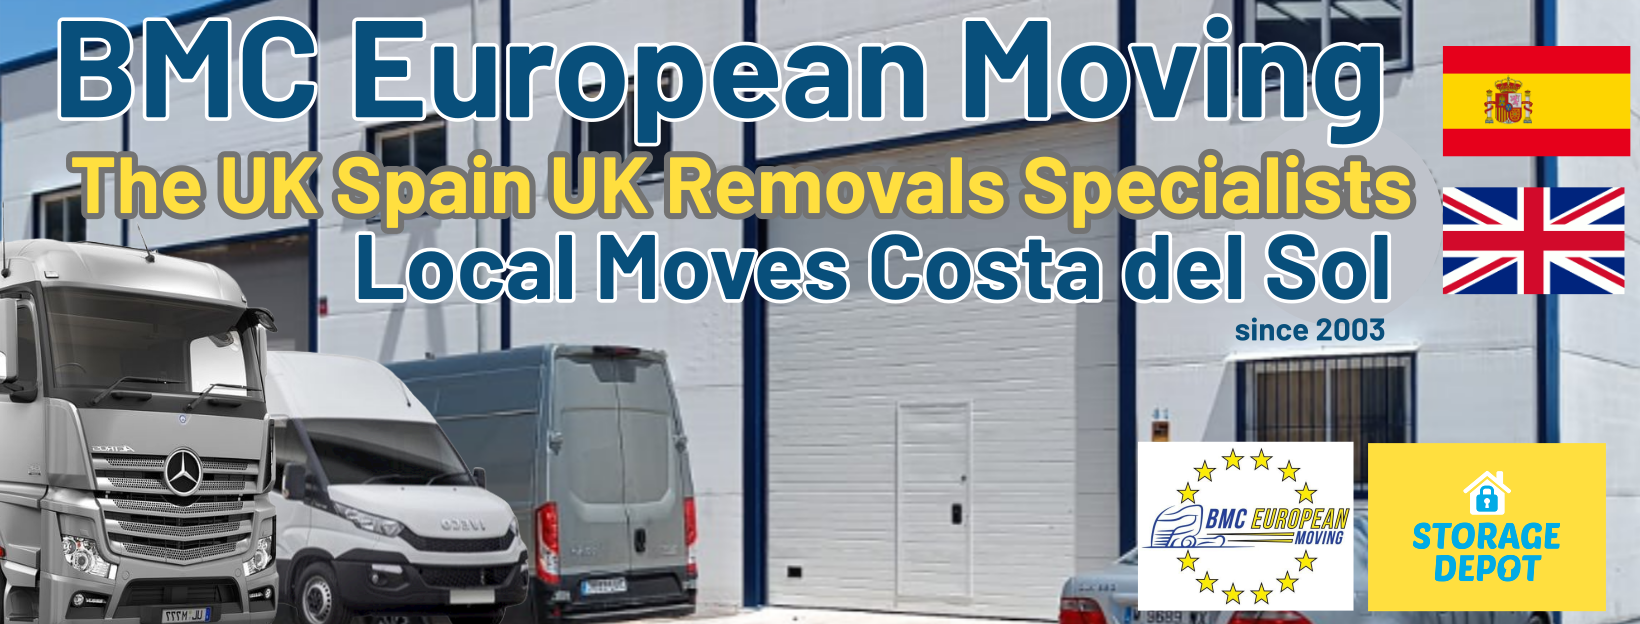 Removals to the UK from Spain or vice versa, we are the professionals since 2005